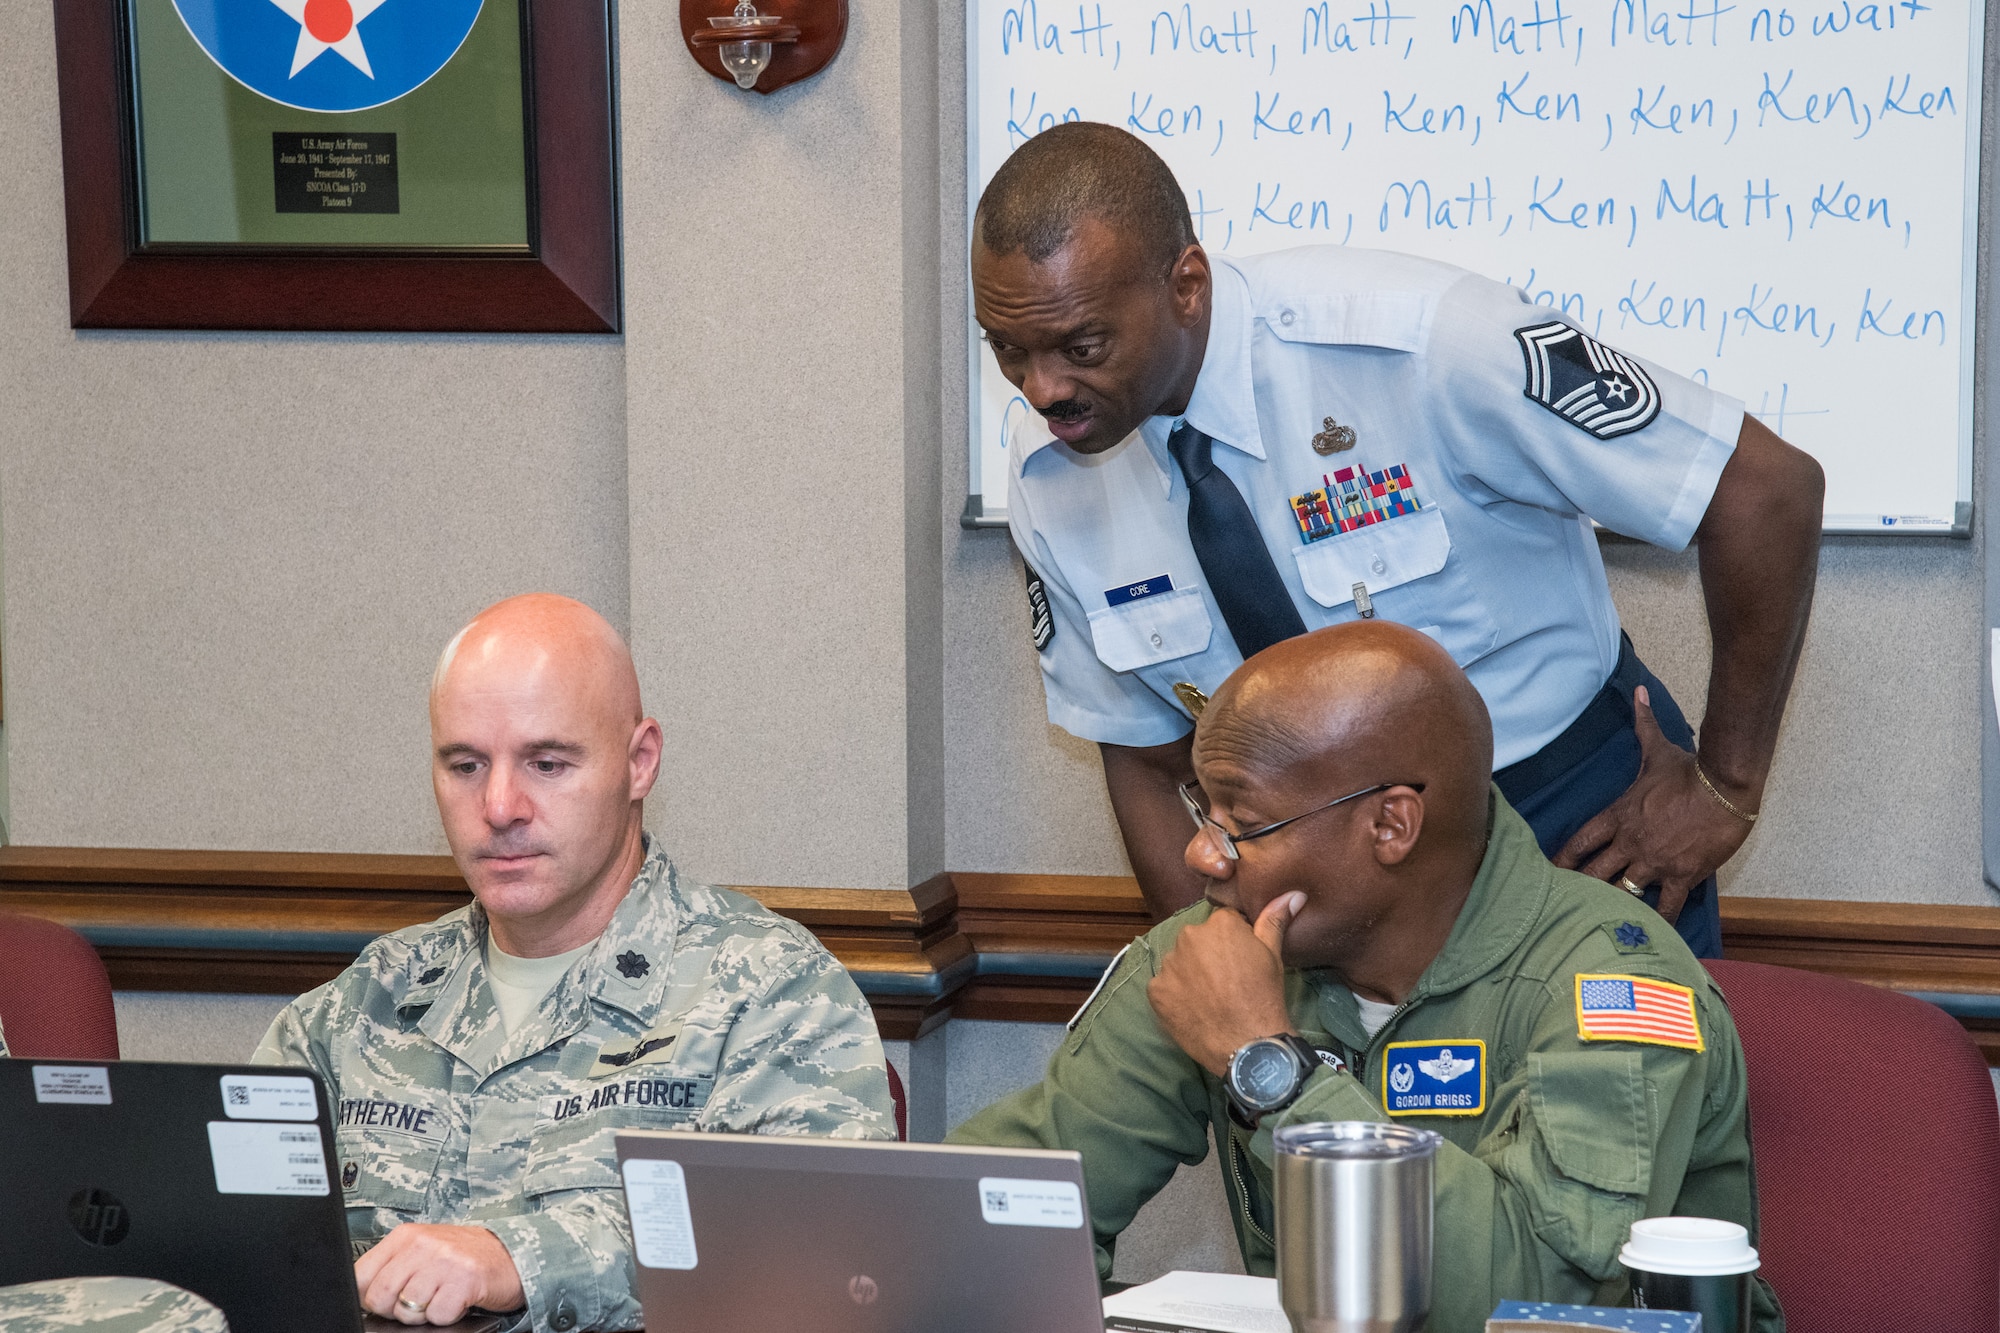 Retired Senior Master Sgt. James Core III, an Air Force Junior ROTC instructor at Cypress Ridge High School, Houston, Texas, assists new instructors, June 20, during the Air Force Junior ROTC Instructor Certification Course held at the Air Force Senior NCO Academy at Maxwell-Gunter Air Force Base, Alabama, June 12-21, 2019. Core was named the 2019 Air Force Junior ROTC Instructor of the Year, Aerospace Science Instructor category. (U.S. Air Force photo by William Birchfield)